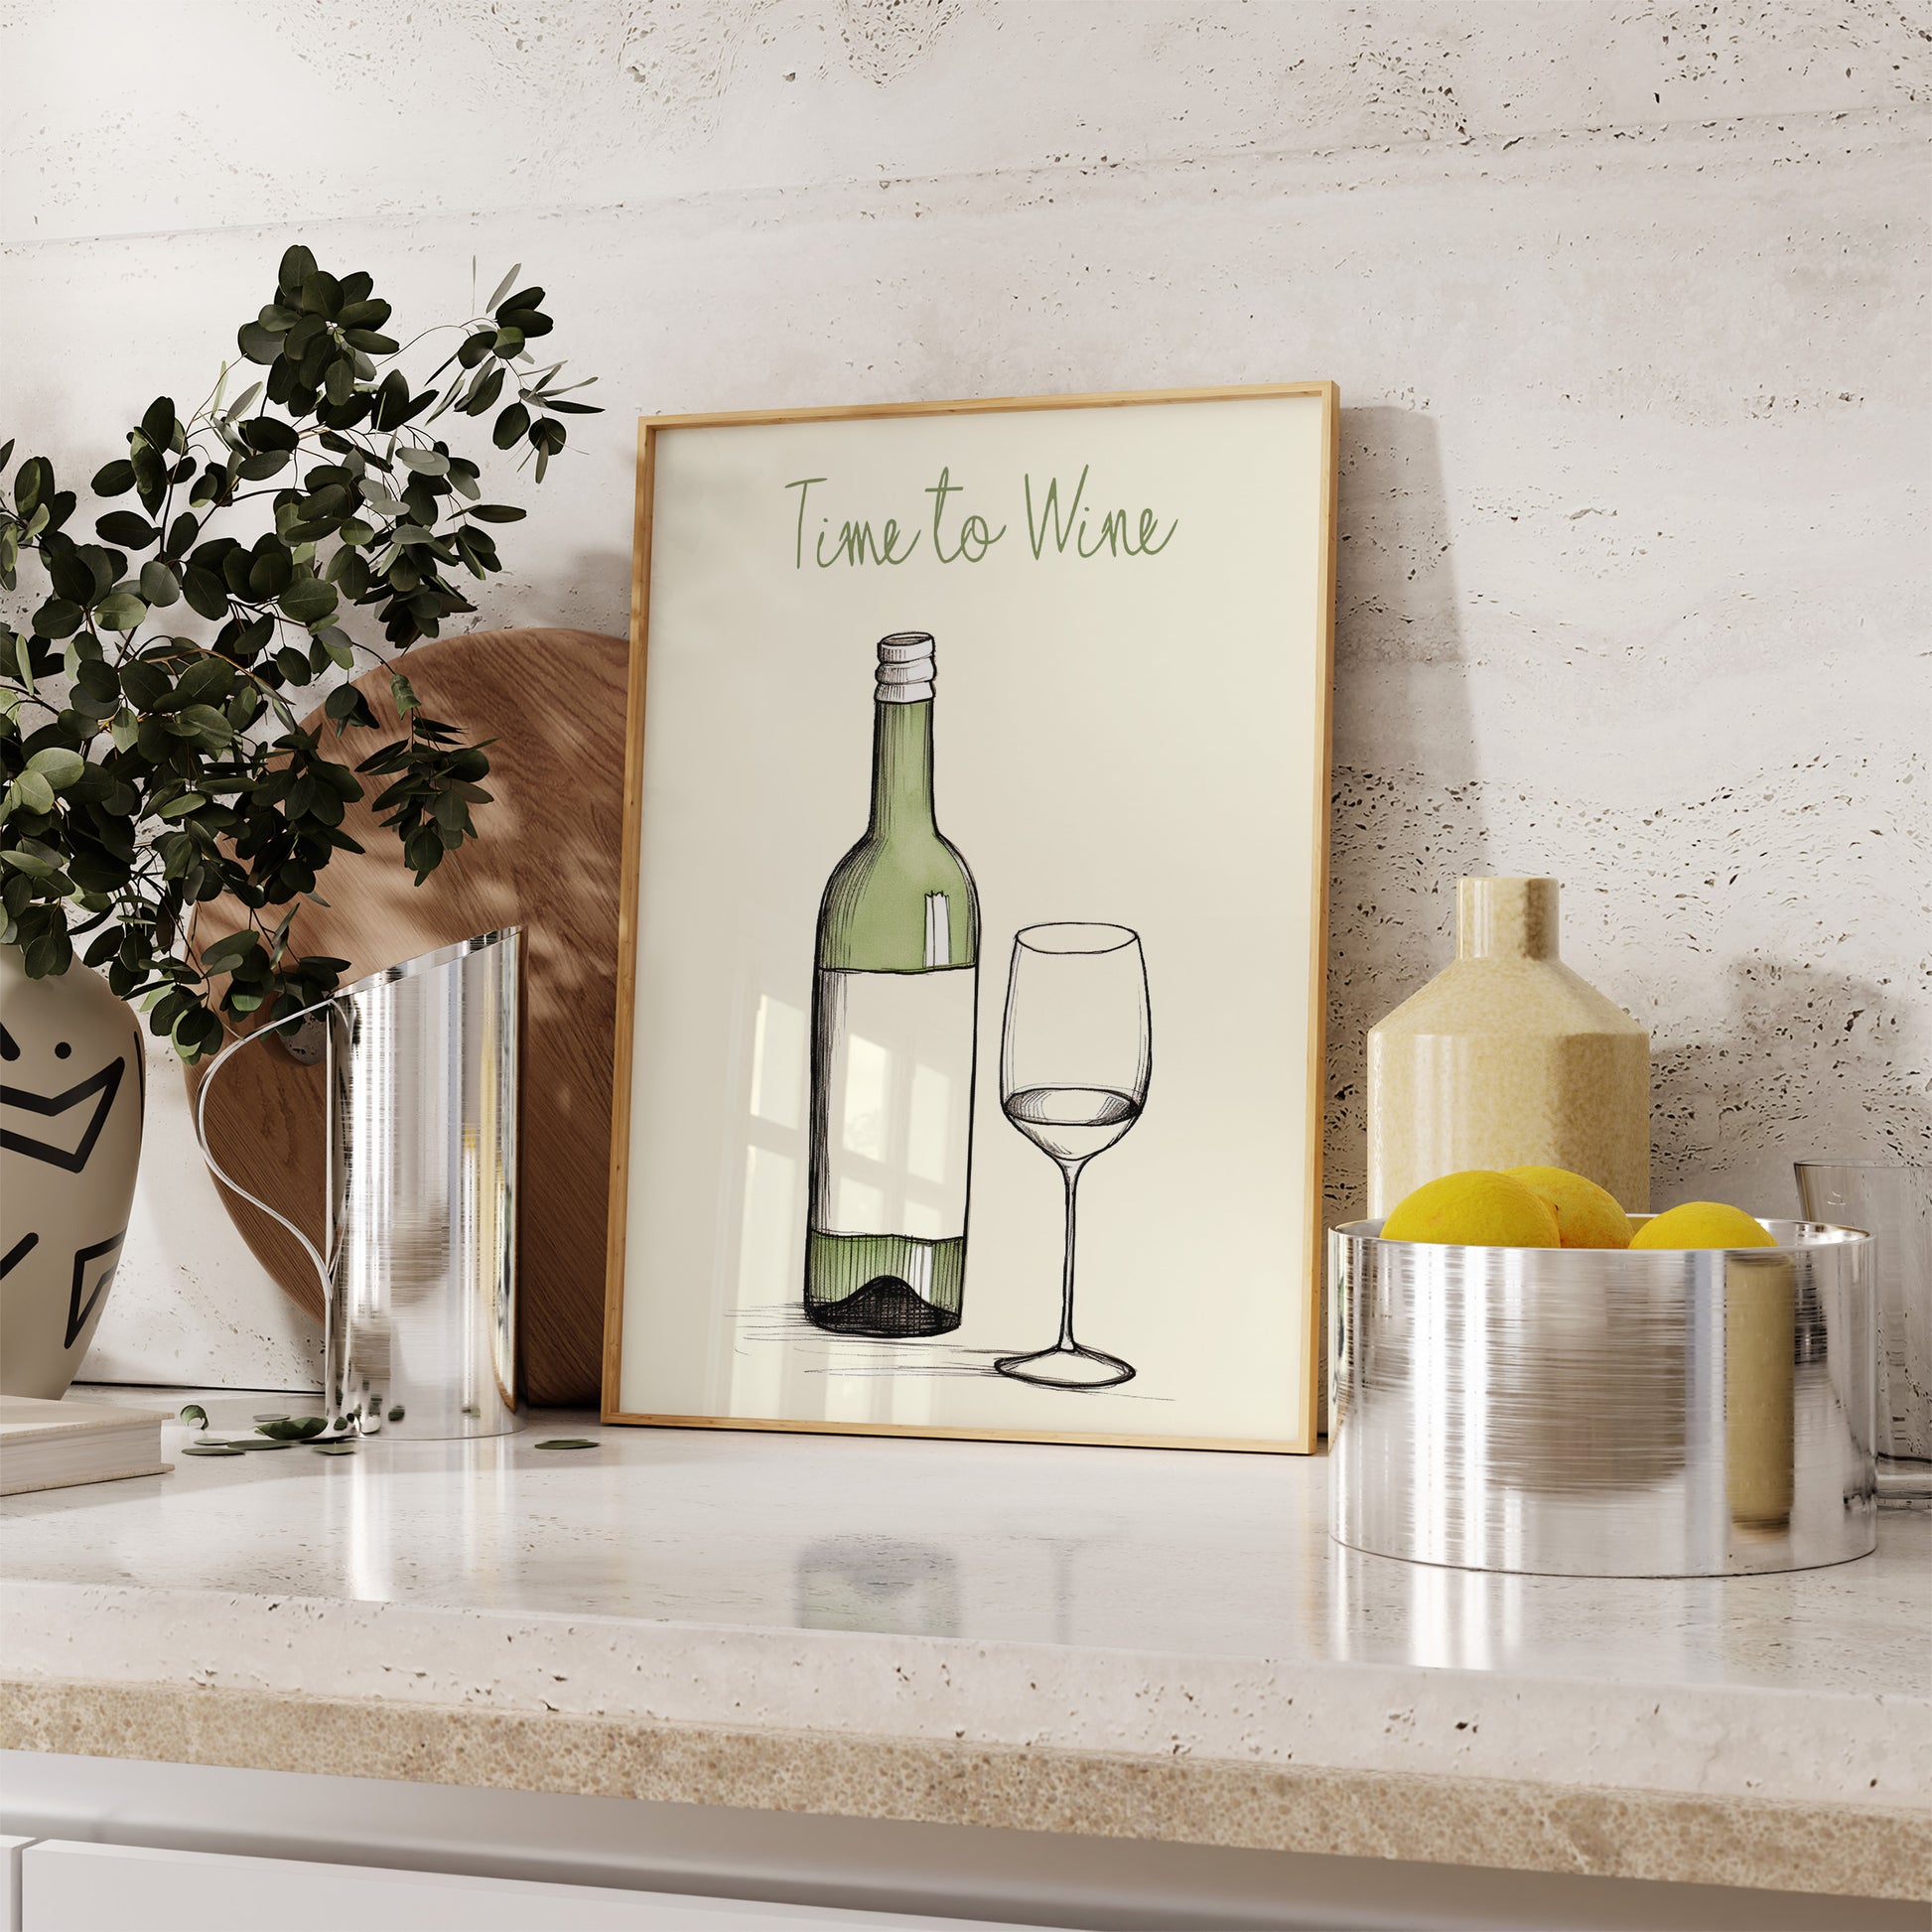 A framed picture with a wine bottle and glass illustration, titled "Time to Wine," on a kitchen countertop.